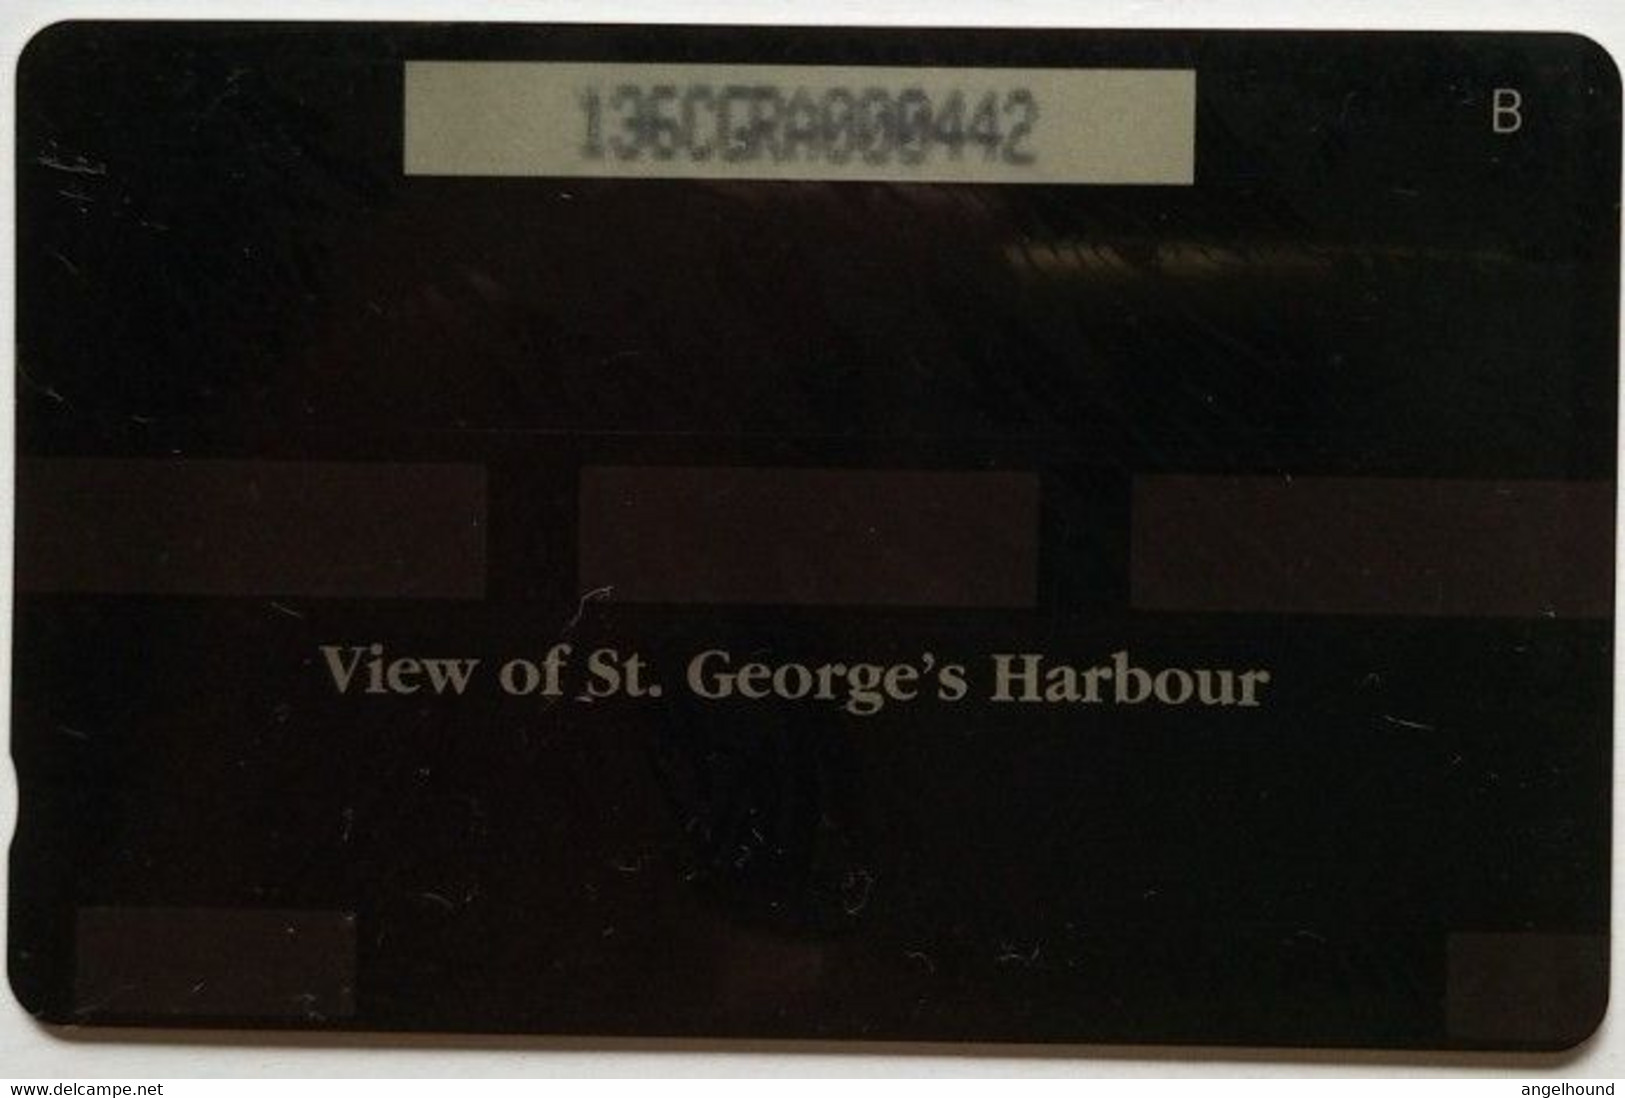 Grenada Cable And Wireless US$10 136CGRA " View Of St. George Harbour" - Grenade